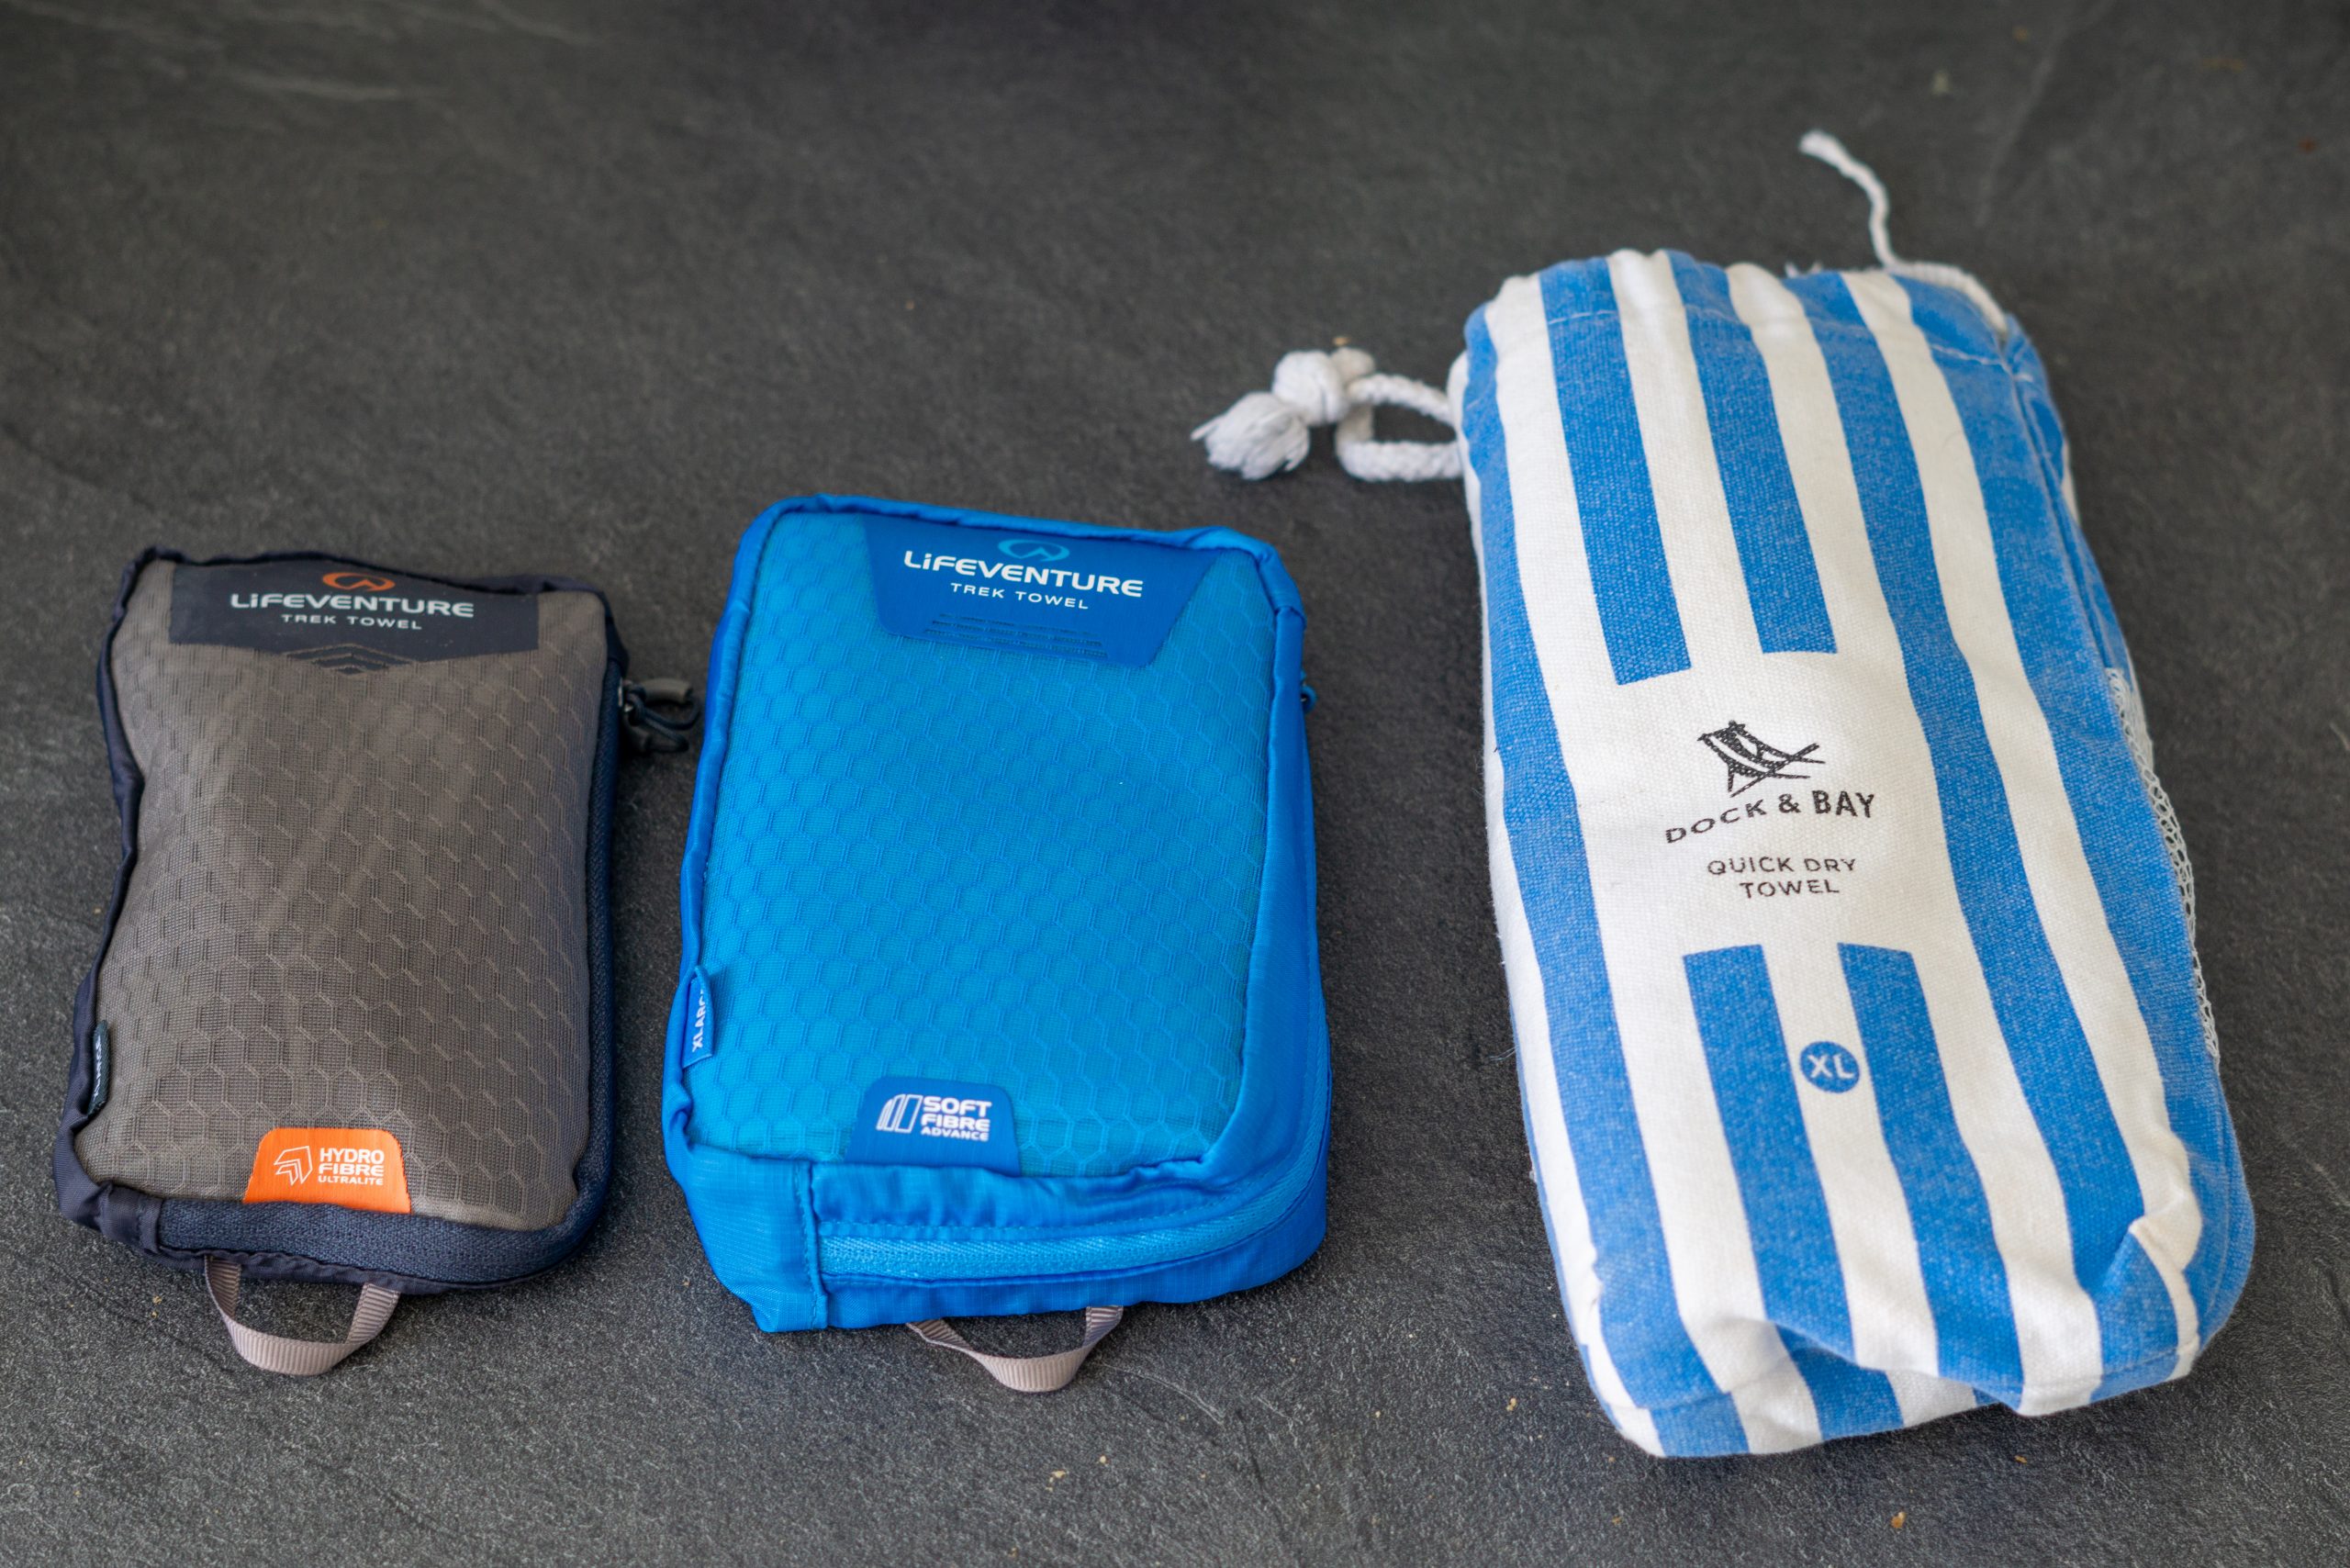 Three travel sized towels. Including Lifeventures Hydrofibre and softfibre travel towel, as well as Dock and Bays Quick Dry Towel